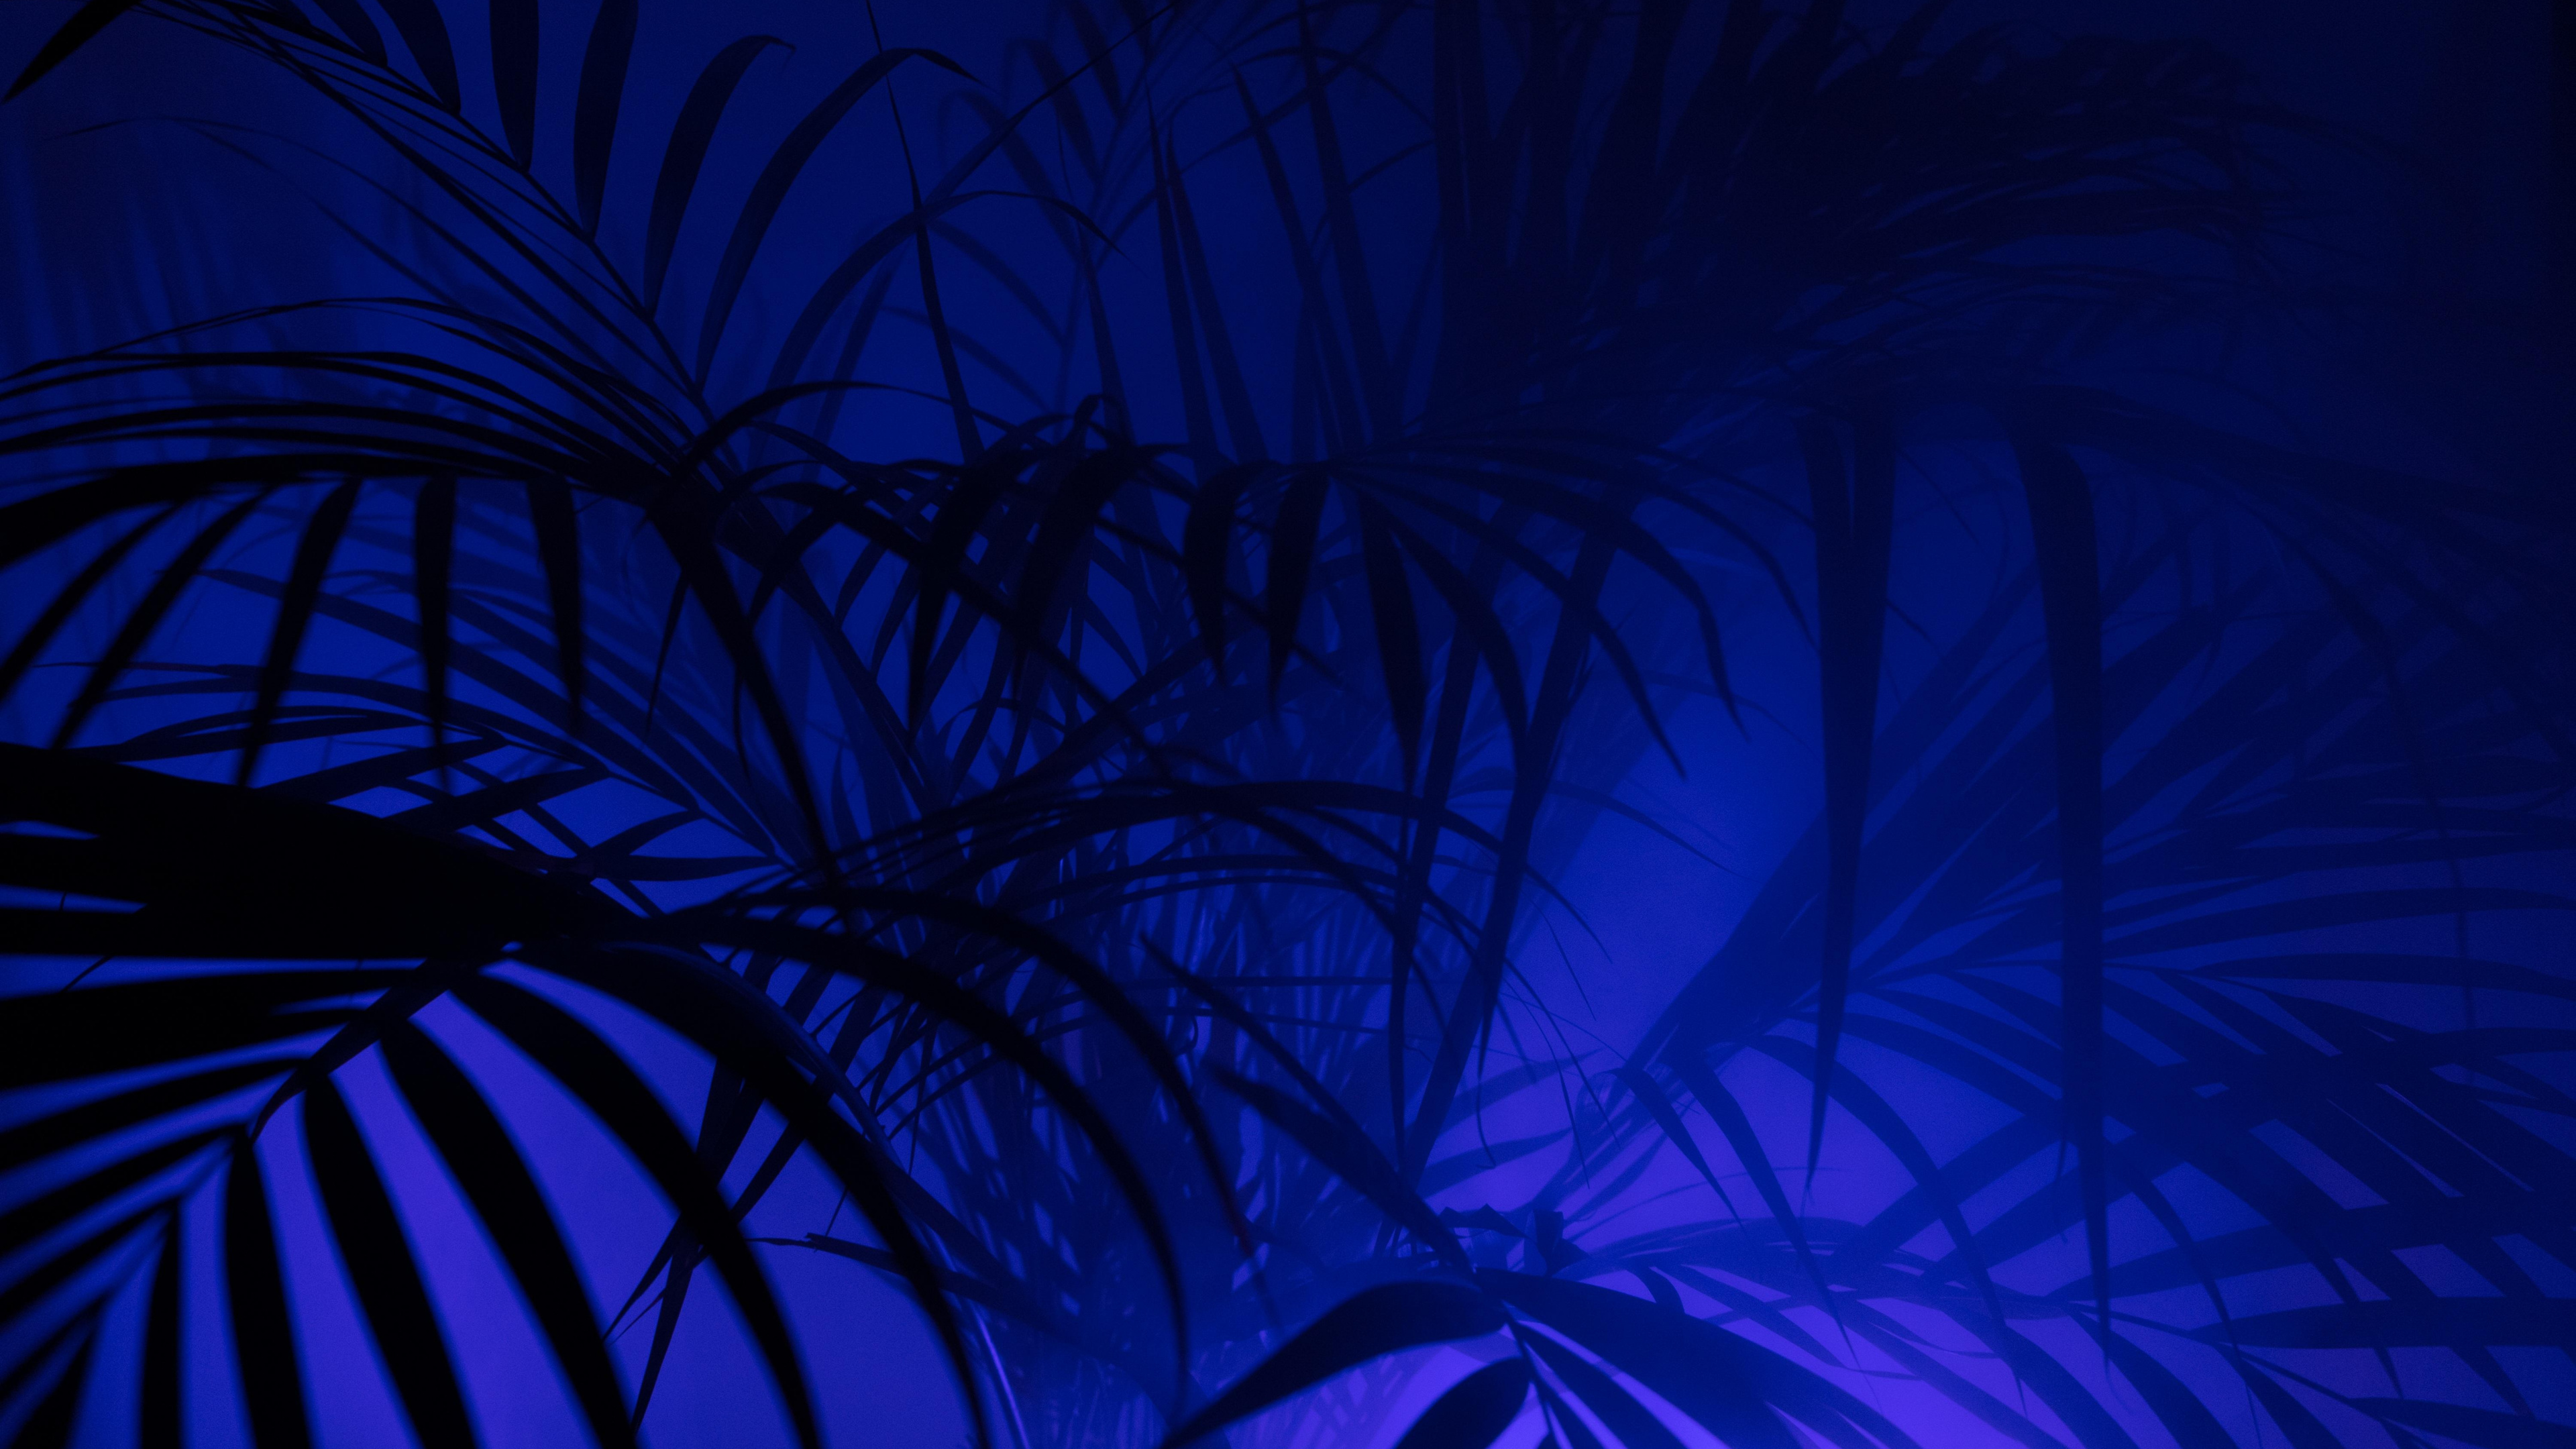 Green Plant in Blue Background. Wallpaper in 3840x2160 Resolution